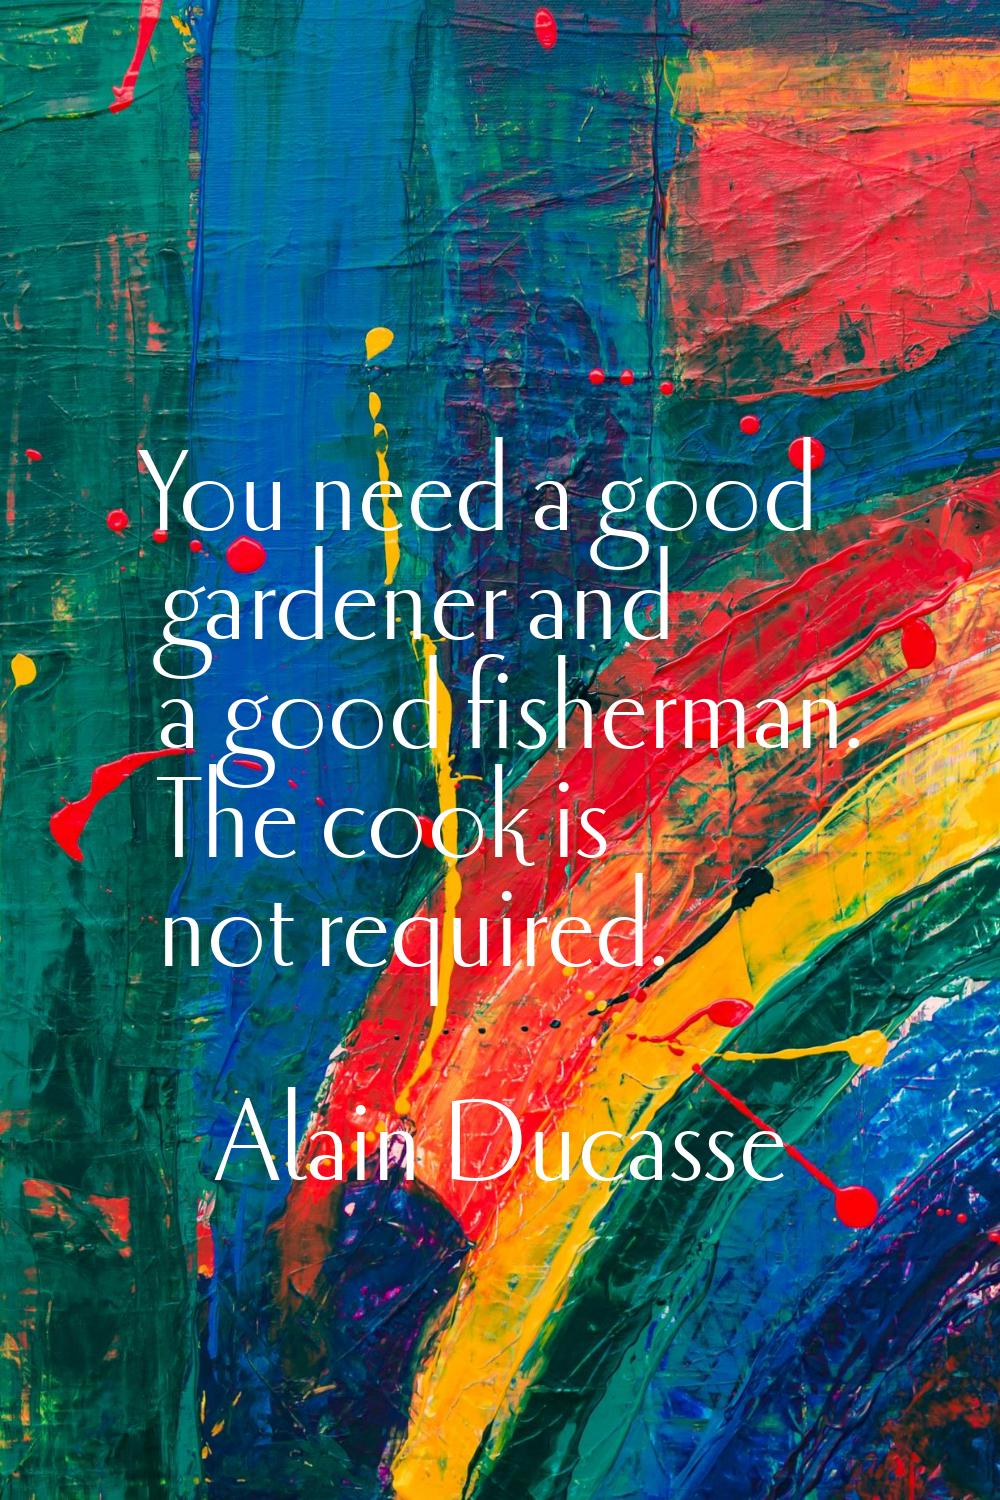 You need a good gardener and a good fisherman. The cook is not required.